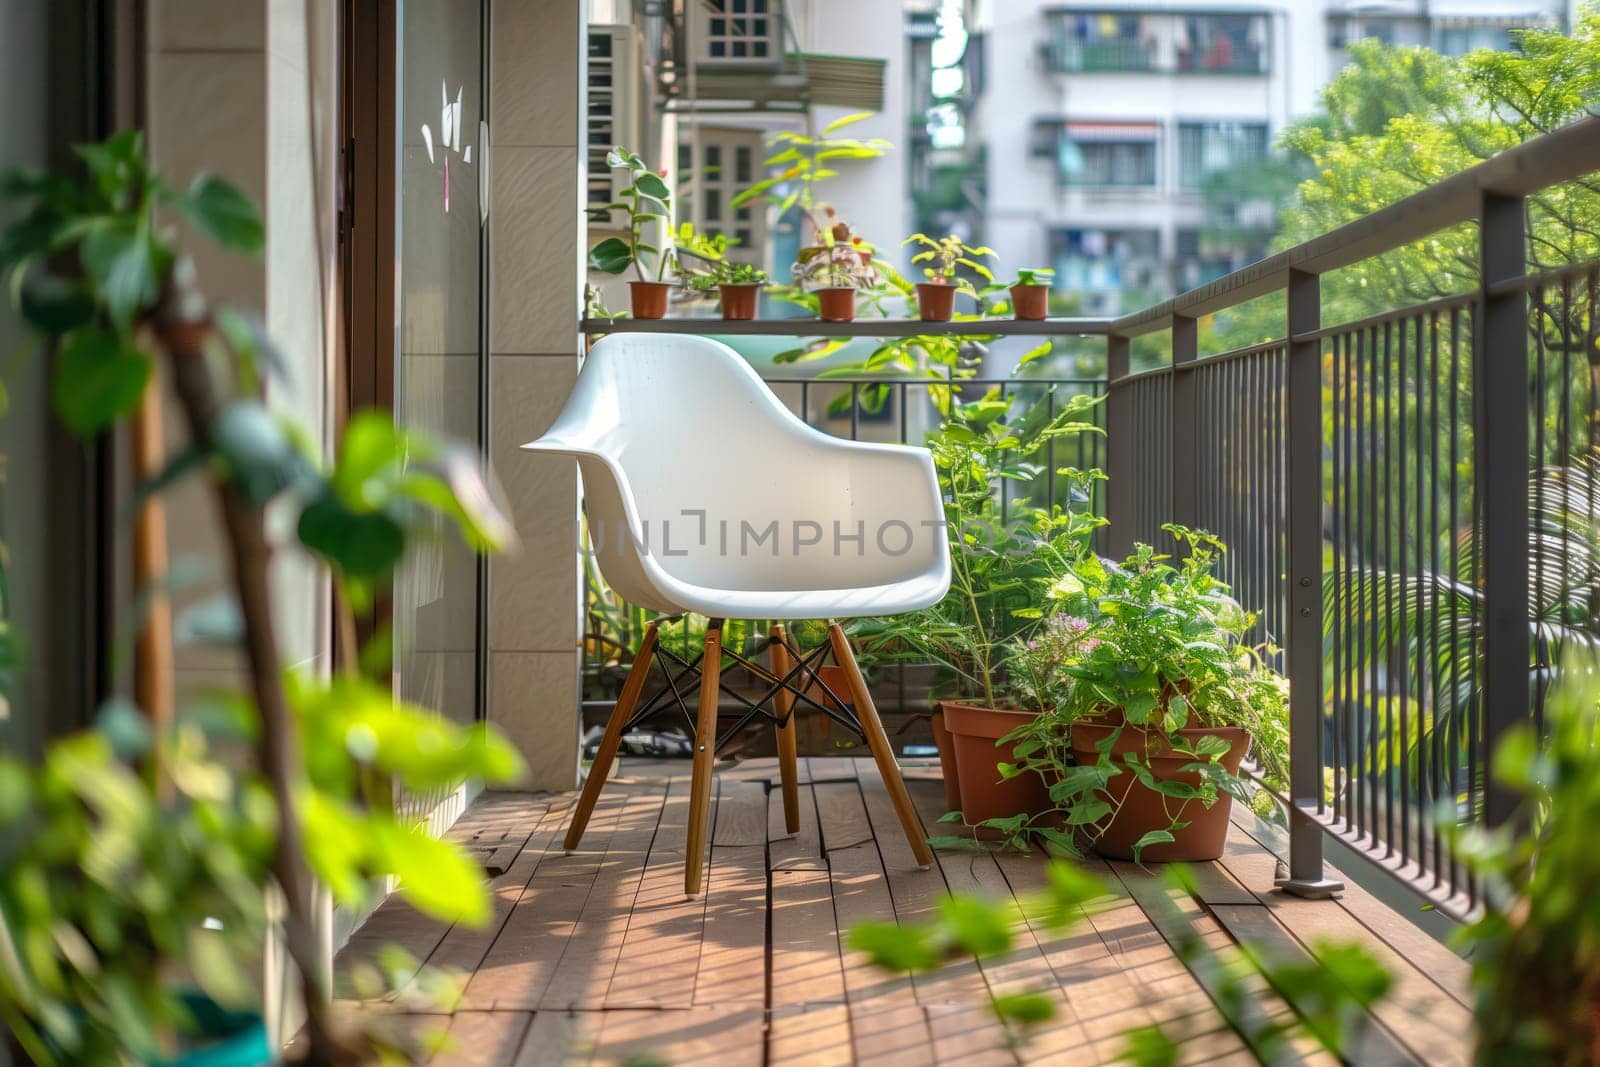 A white chair is placed on a balcony filled with potted plants, creating a serene outdoor space with a touch of interior design